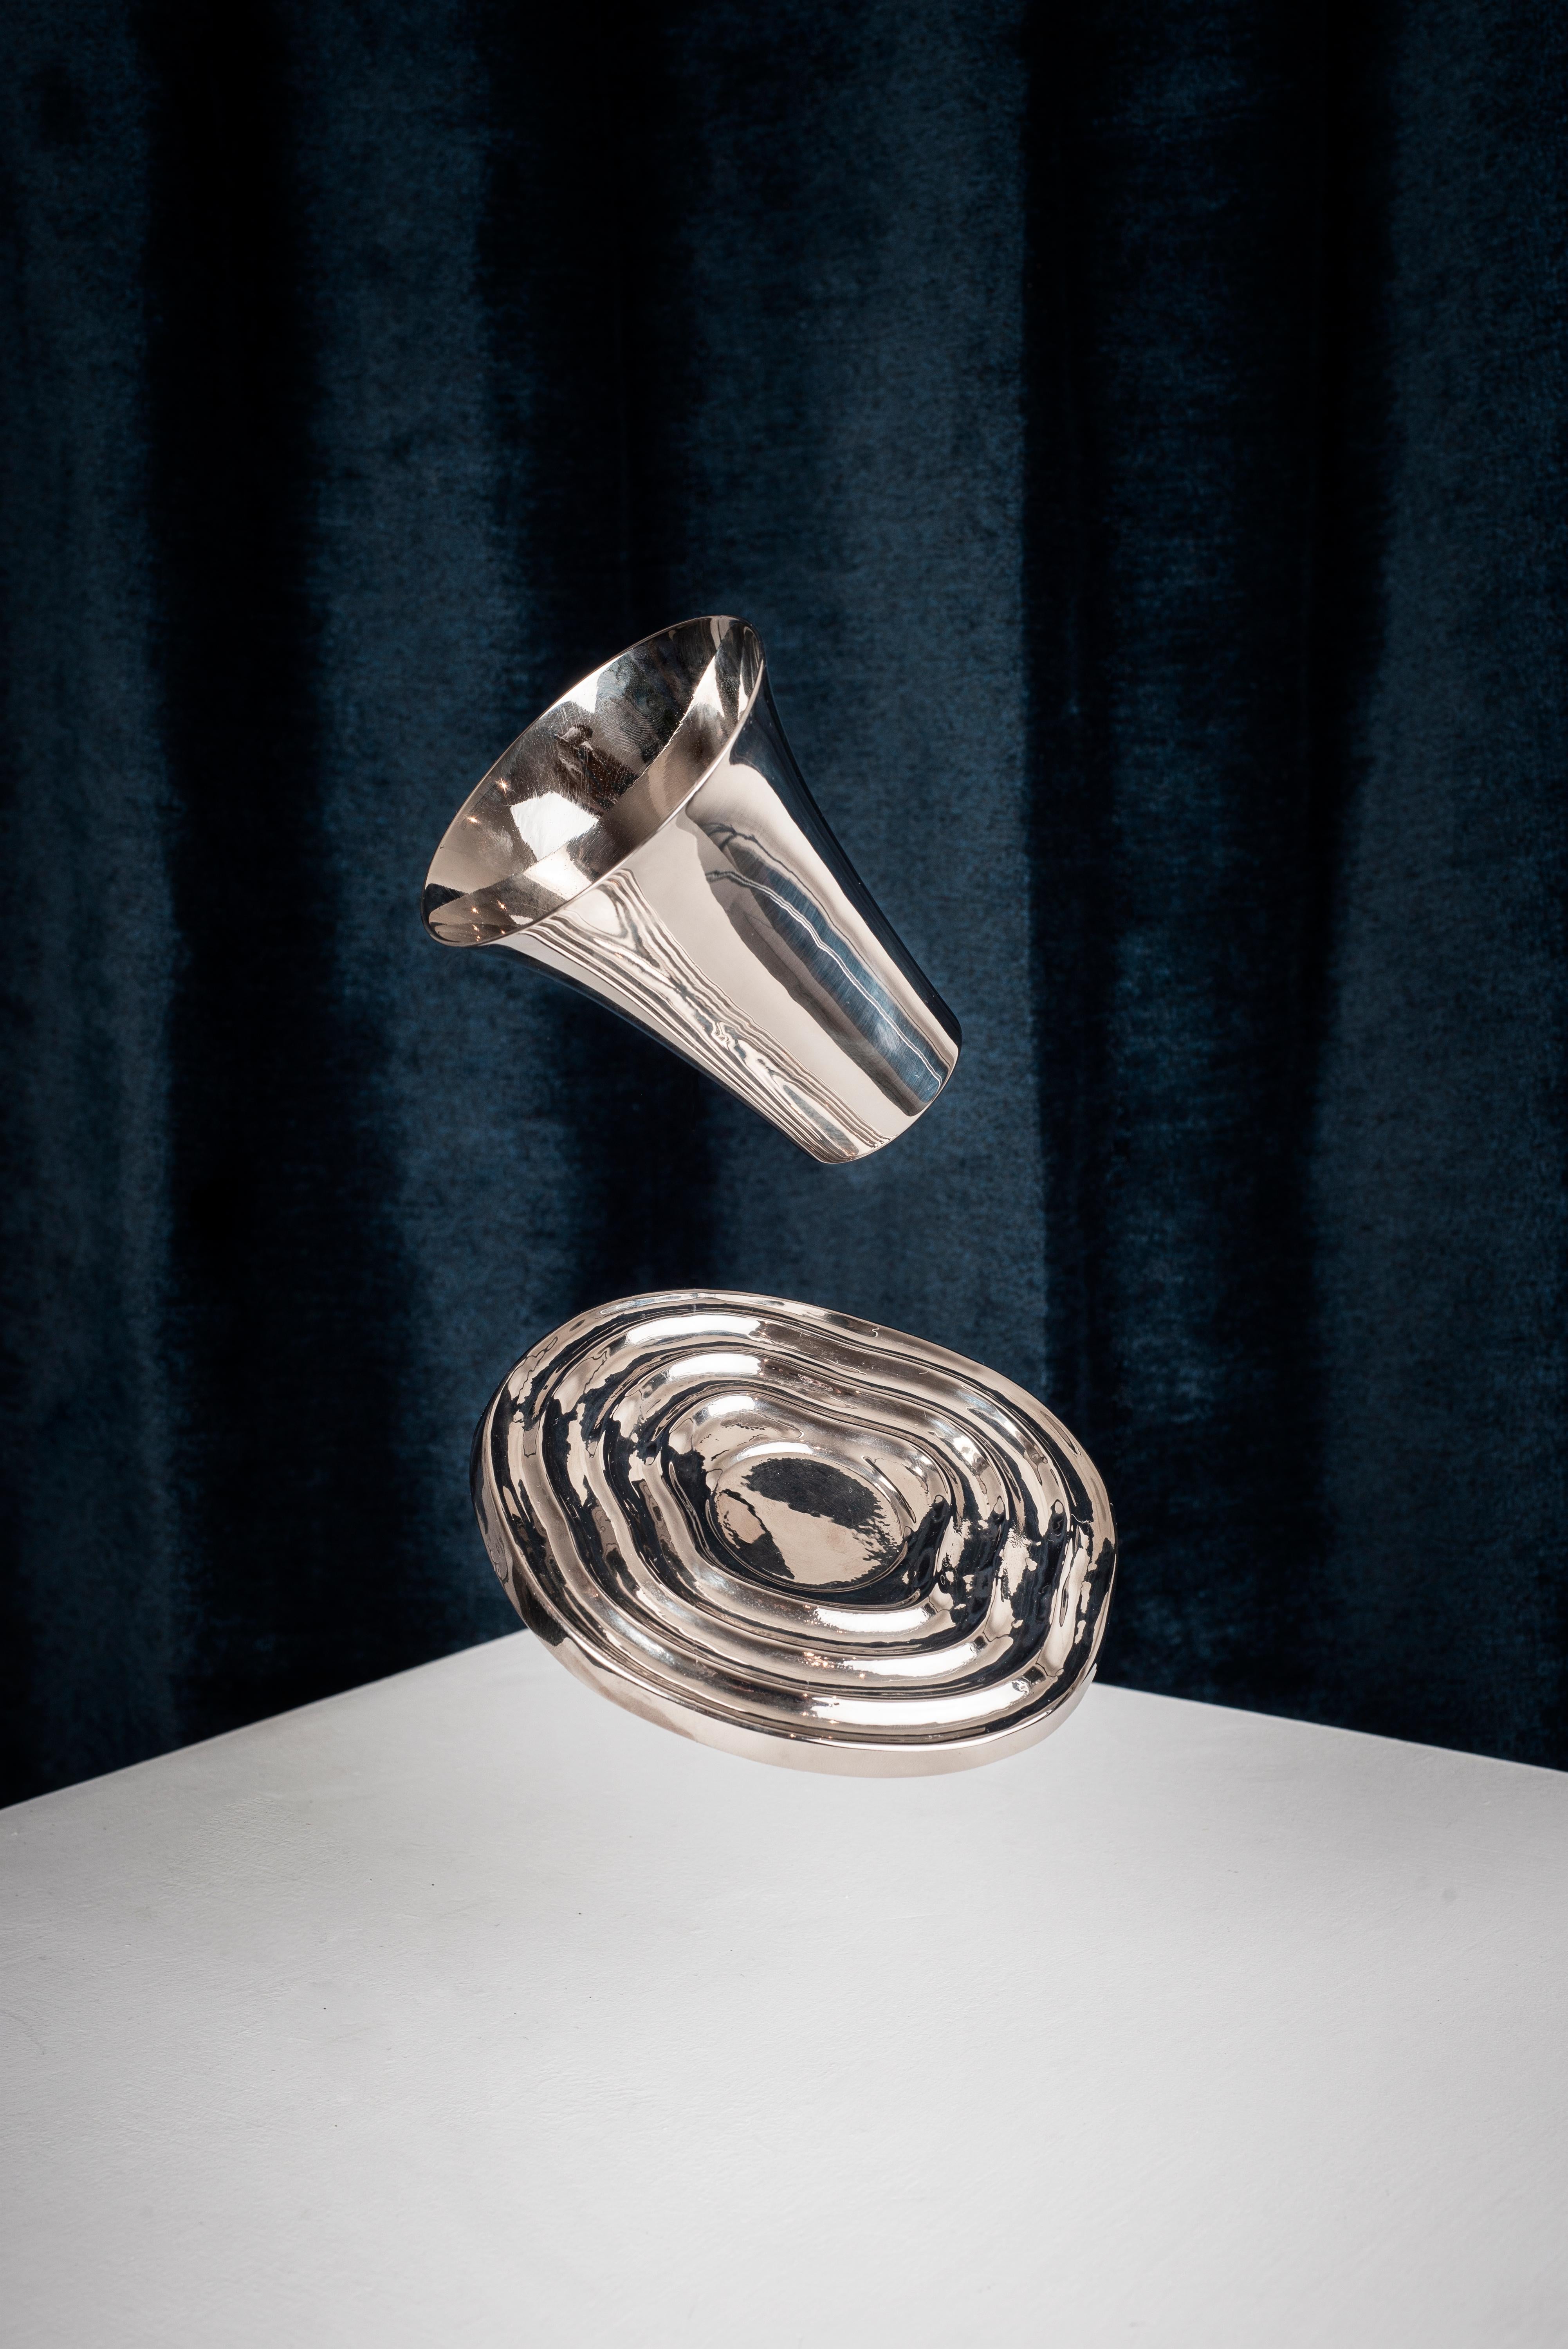 bruci's hand-spun nickel-plated brass overflow cup and saucer takes as inspiration the Shabbat dinner tradition to fill your cup to the brim and spoil some wine, with the hope of having an upcoming week where blessings overflow. The Overflow cup and